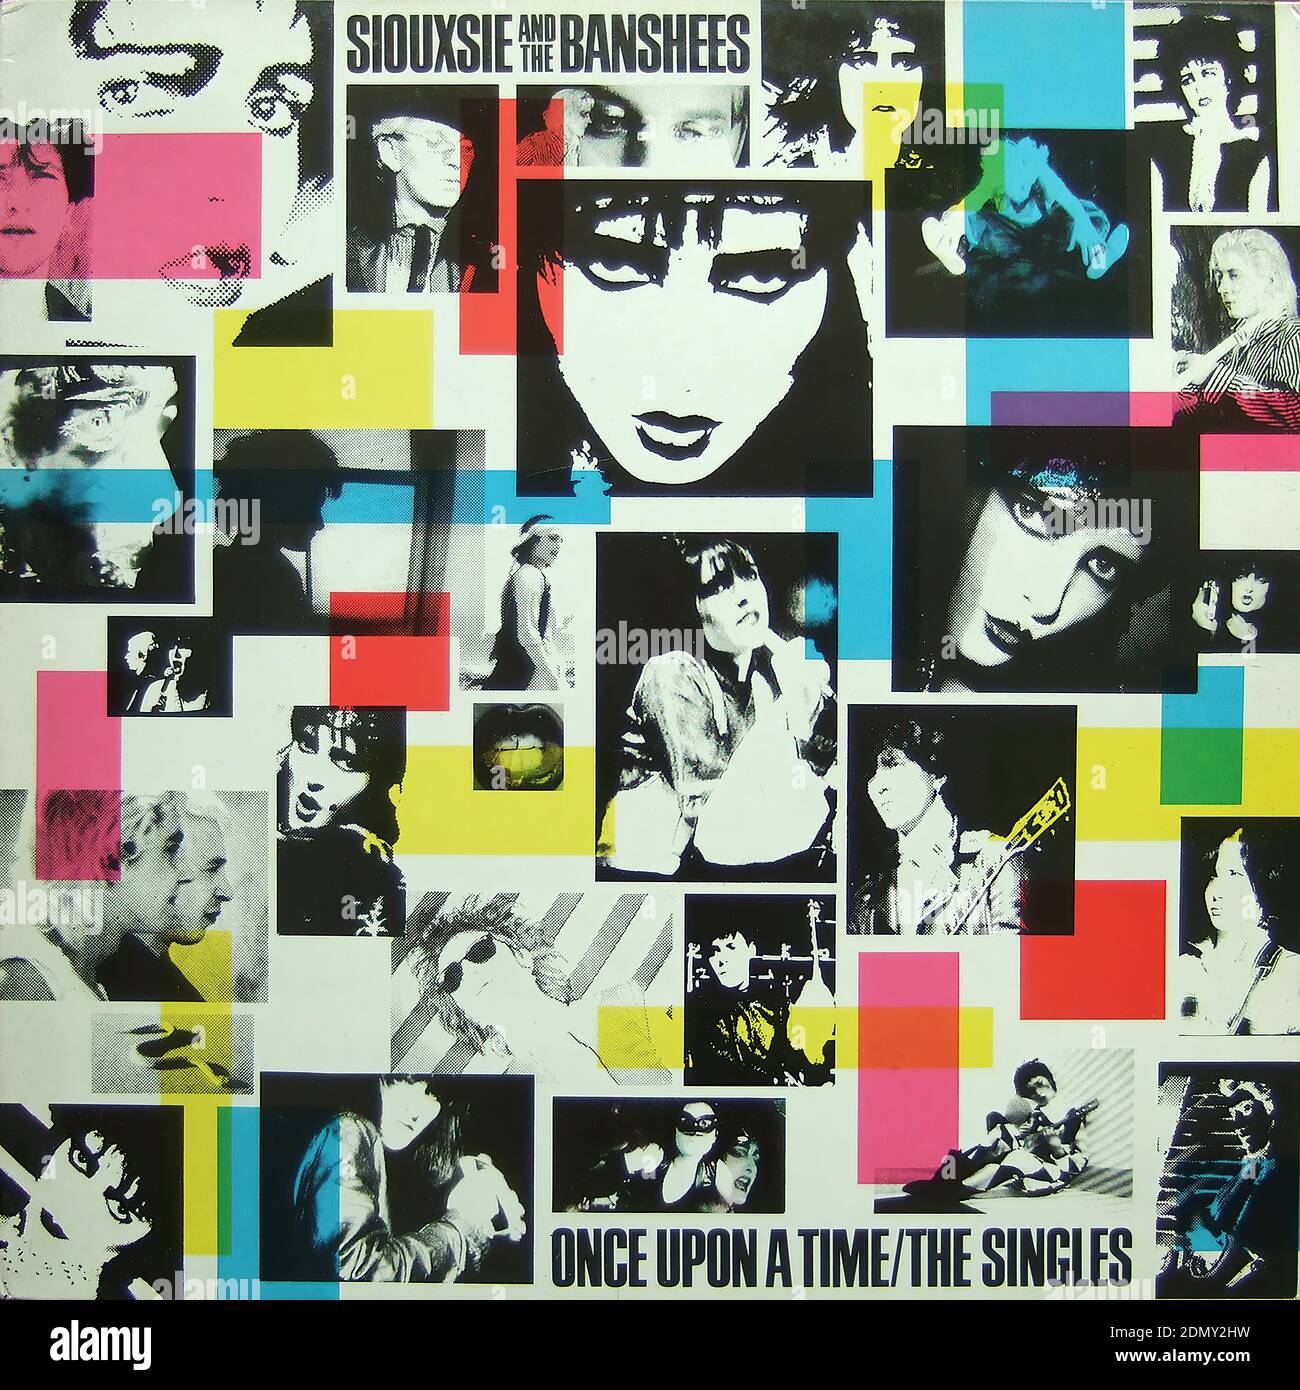 Siouxsie & The Banshees - Once Upon A Time The Singles - Vintage vinyl album  cover Photo Stock - Alamy